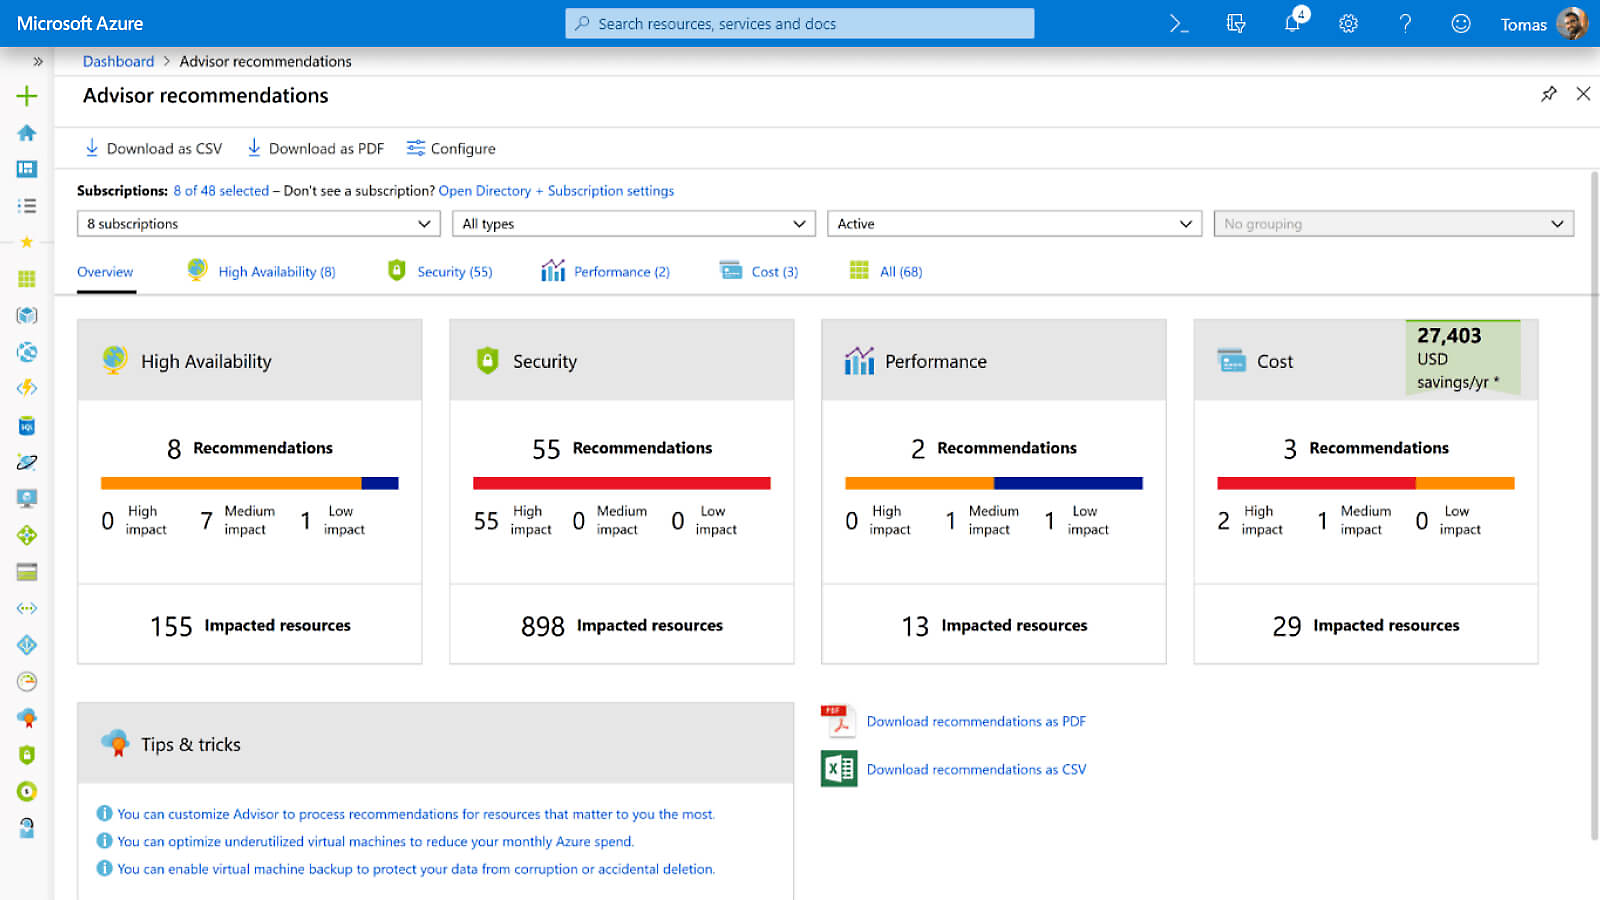 Advisor recommendations based on subscriptions in Azure